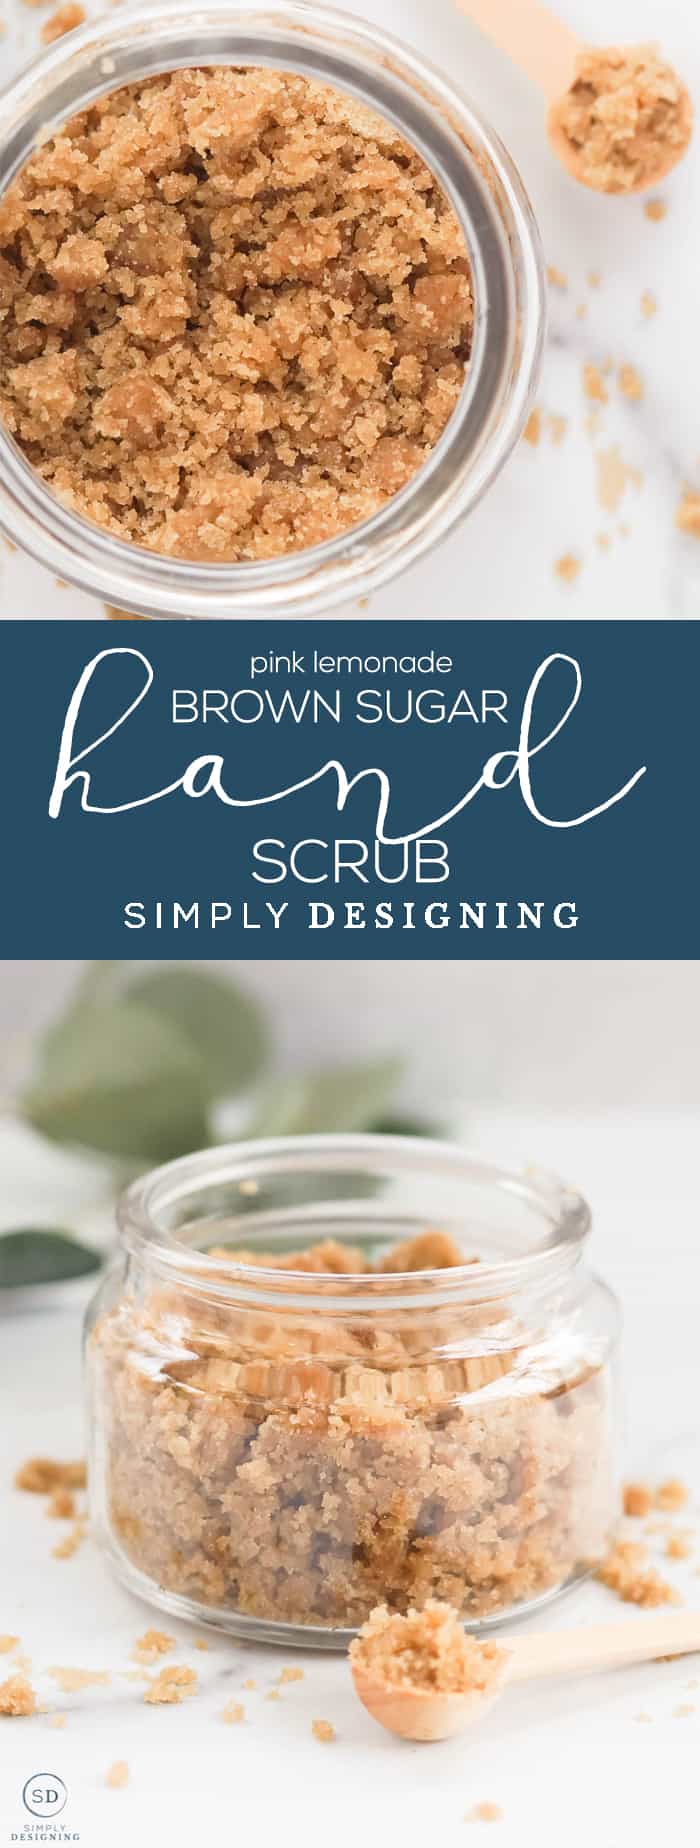 This yummy pink lemonade brown sugar hand scrub recipe is perfect for daily hand exfoliation